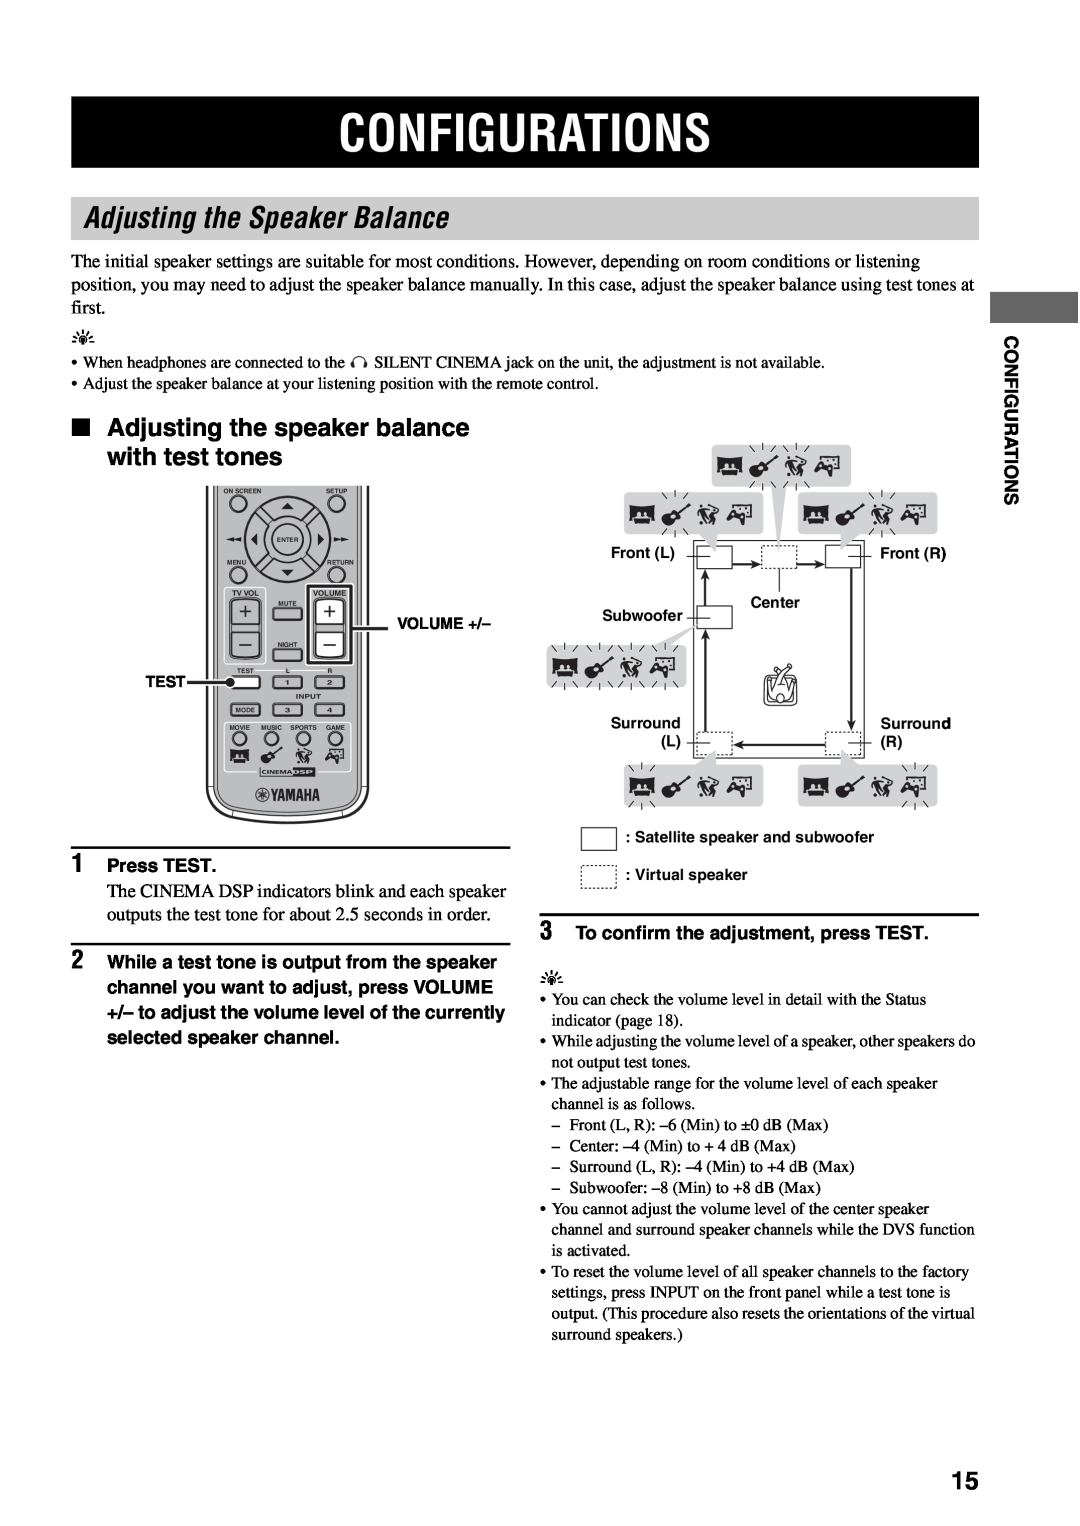 Yamaha AVX-S30 owner manual Configurations, Adjusting the Speaker Balance, Adjusting the speaker balance with test tones 